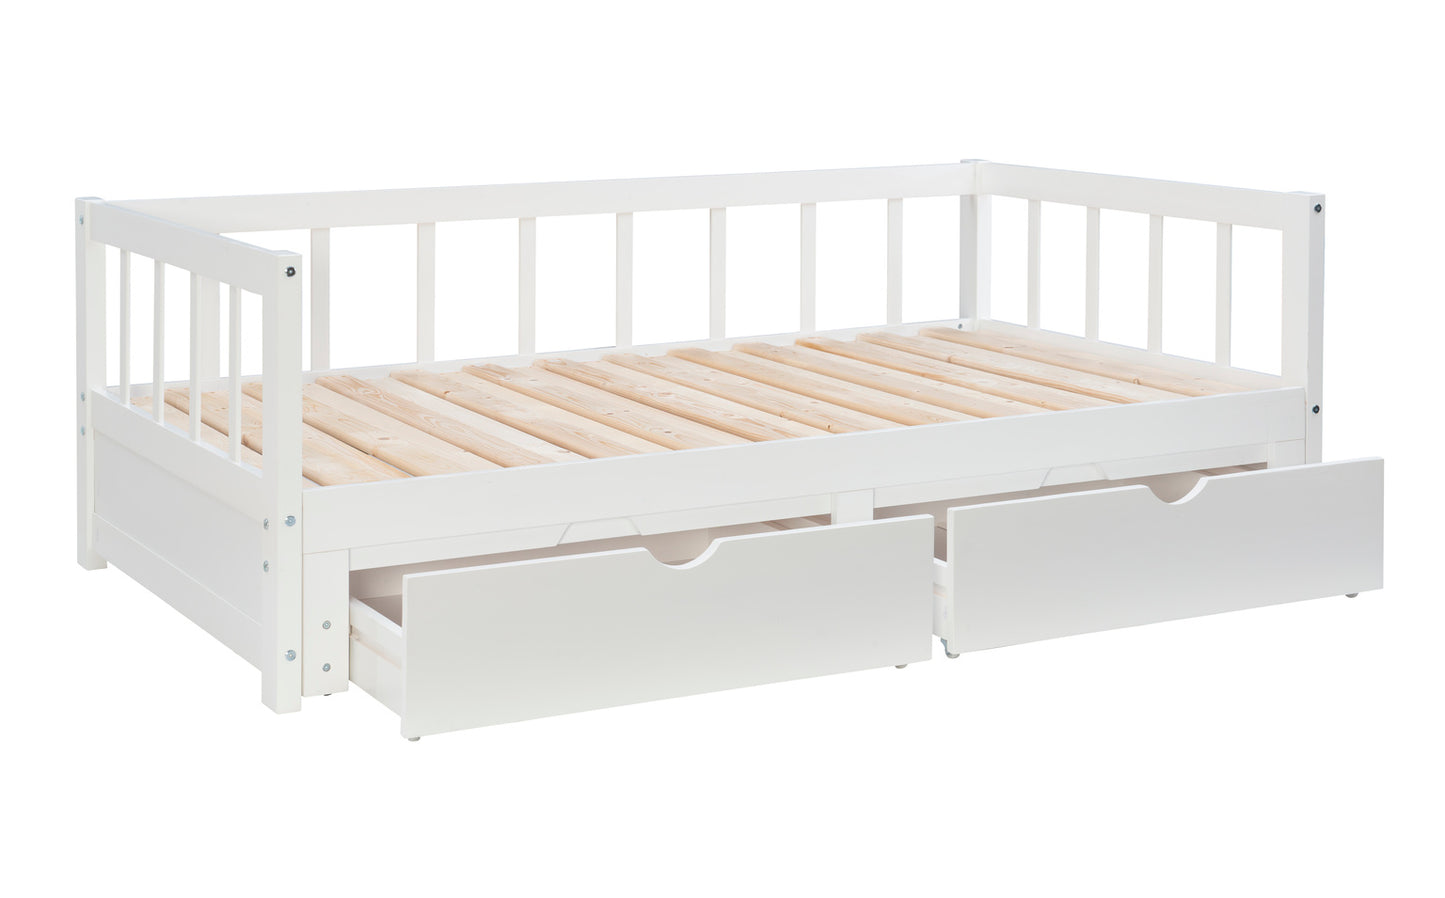 WEEKLY or MONTHLY. White Hope Eternal Twin Daybed